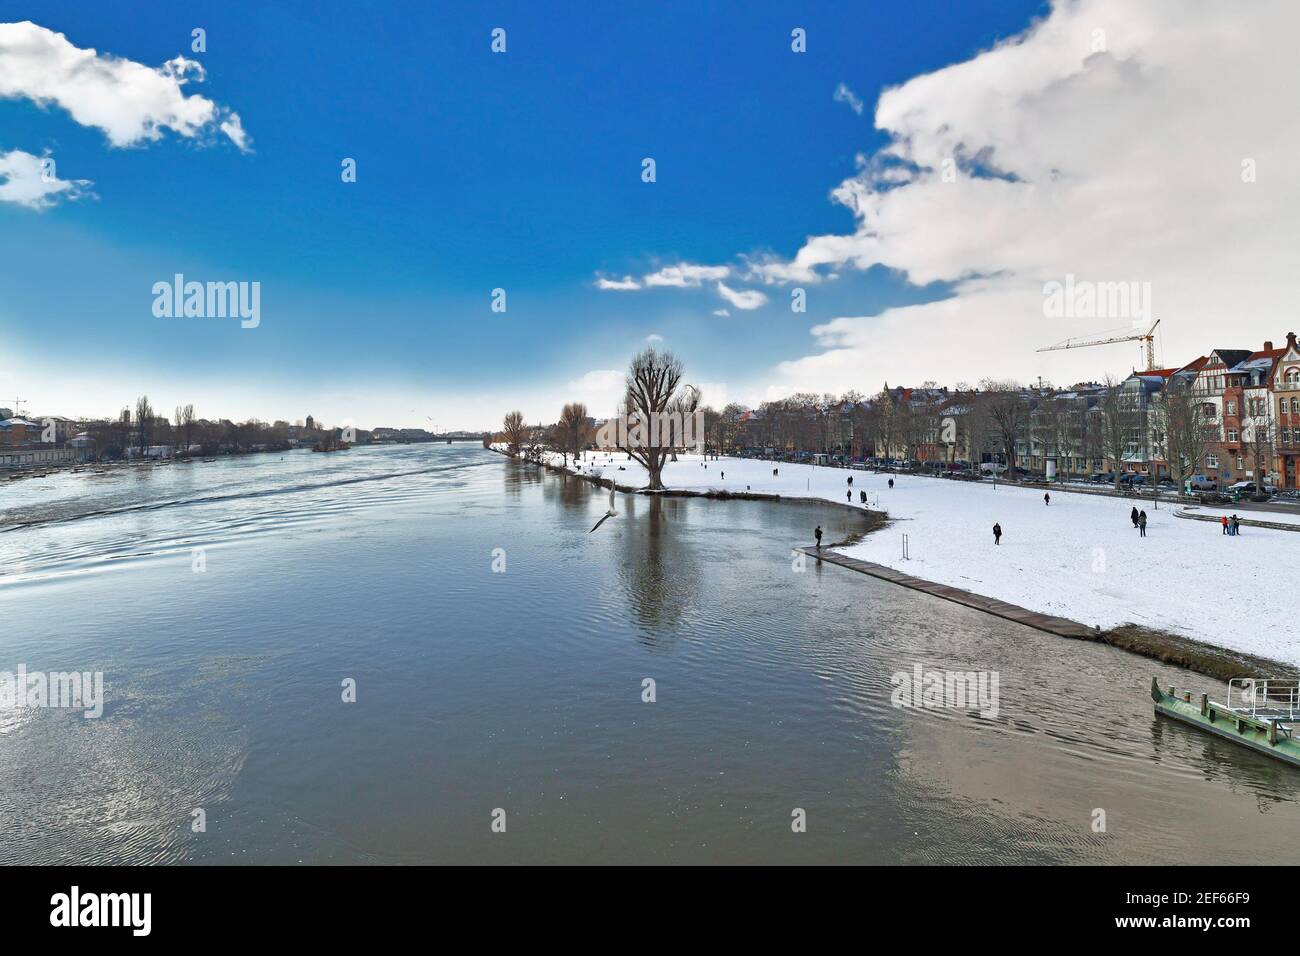 Heidelberg, Germany - February 2021: Neckar river with lower river bank called 'Neckarwiese' with big meadow covered in snow and people taking walks Stock Photo